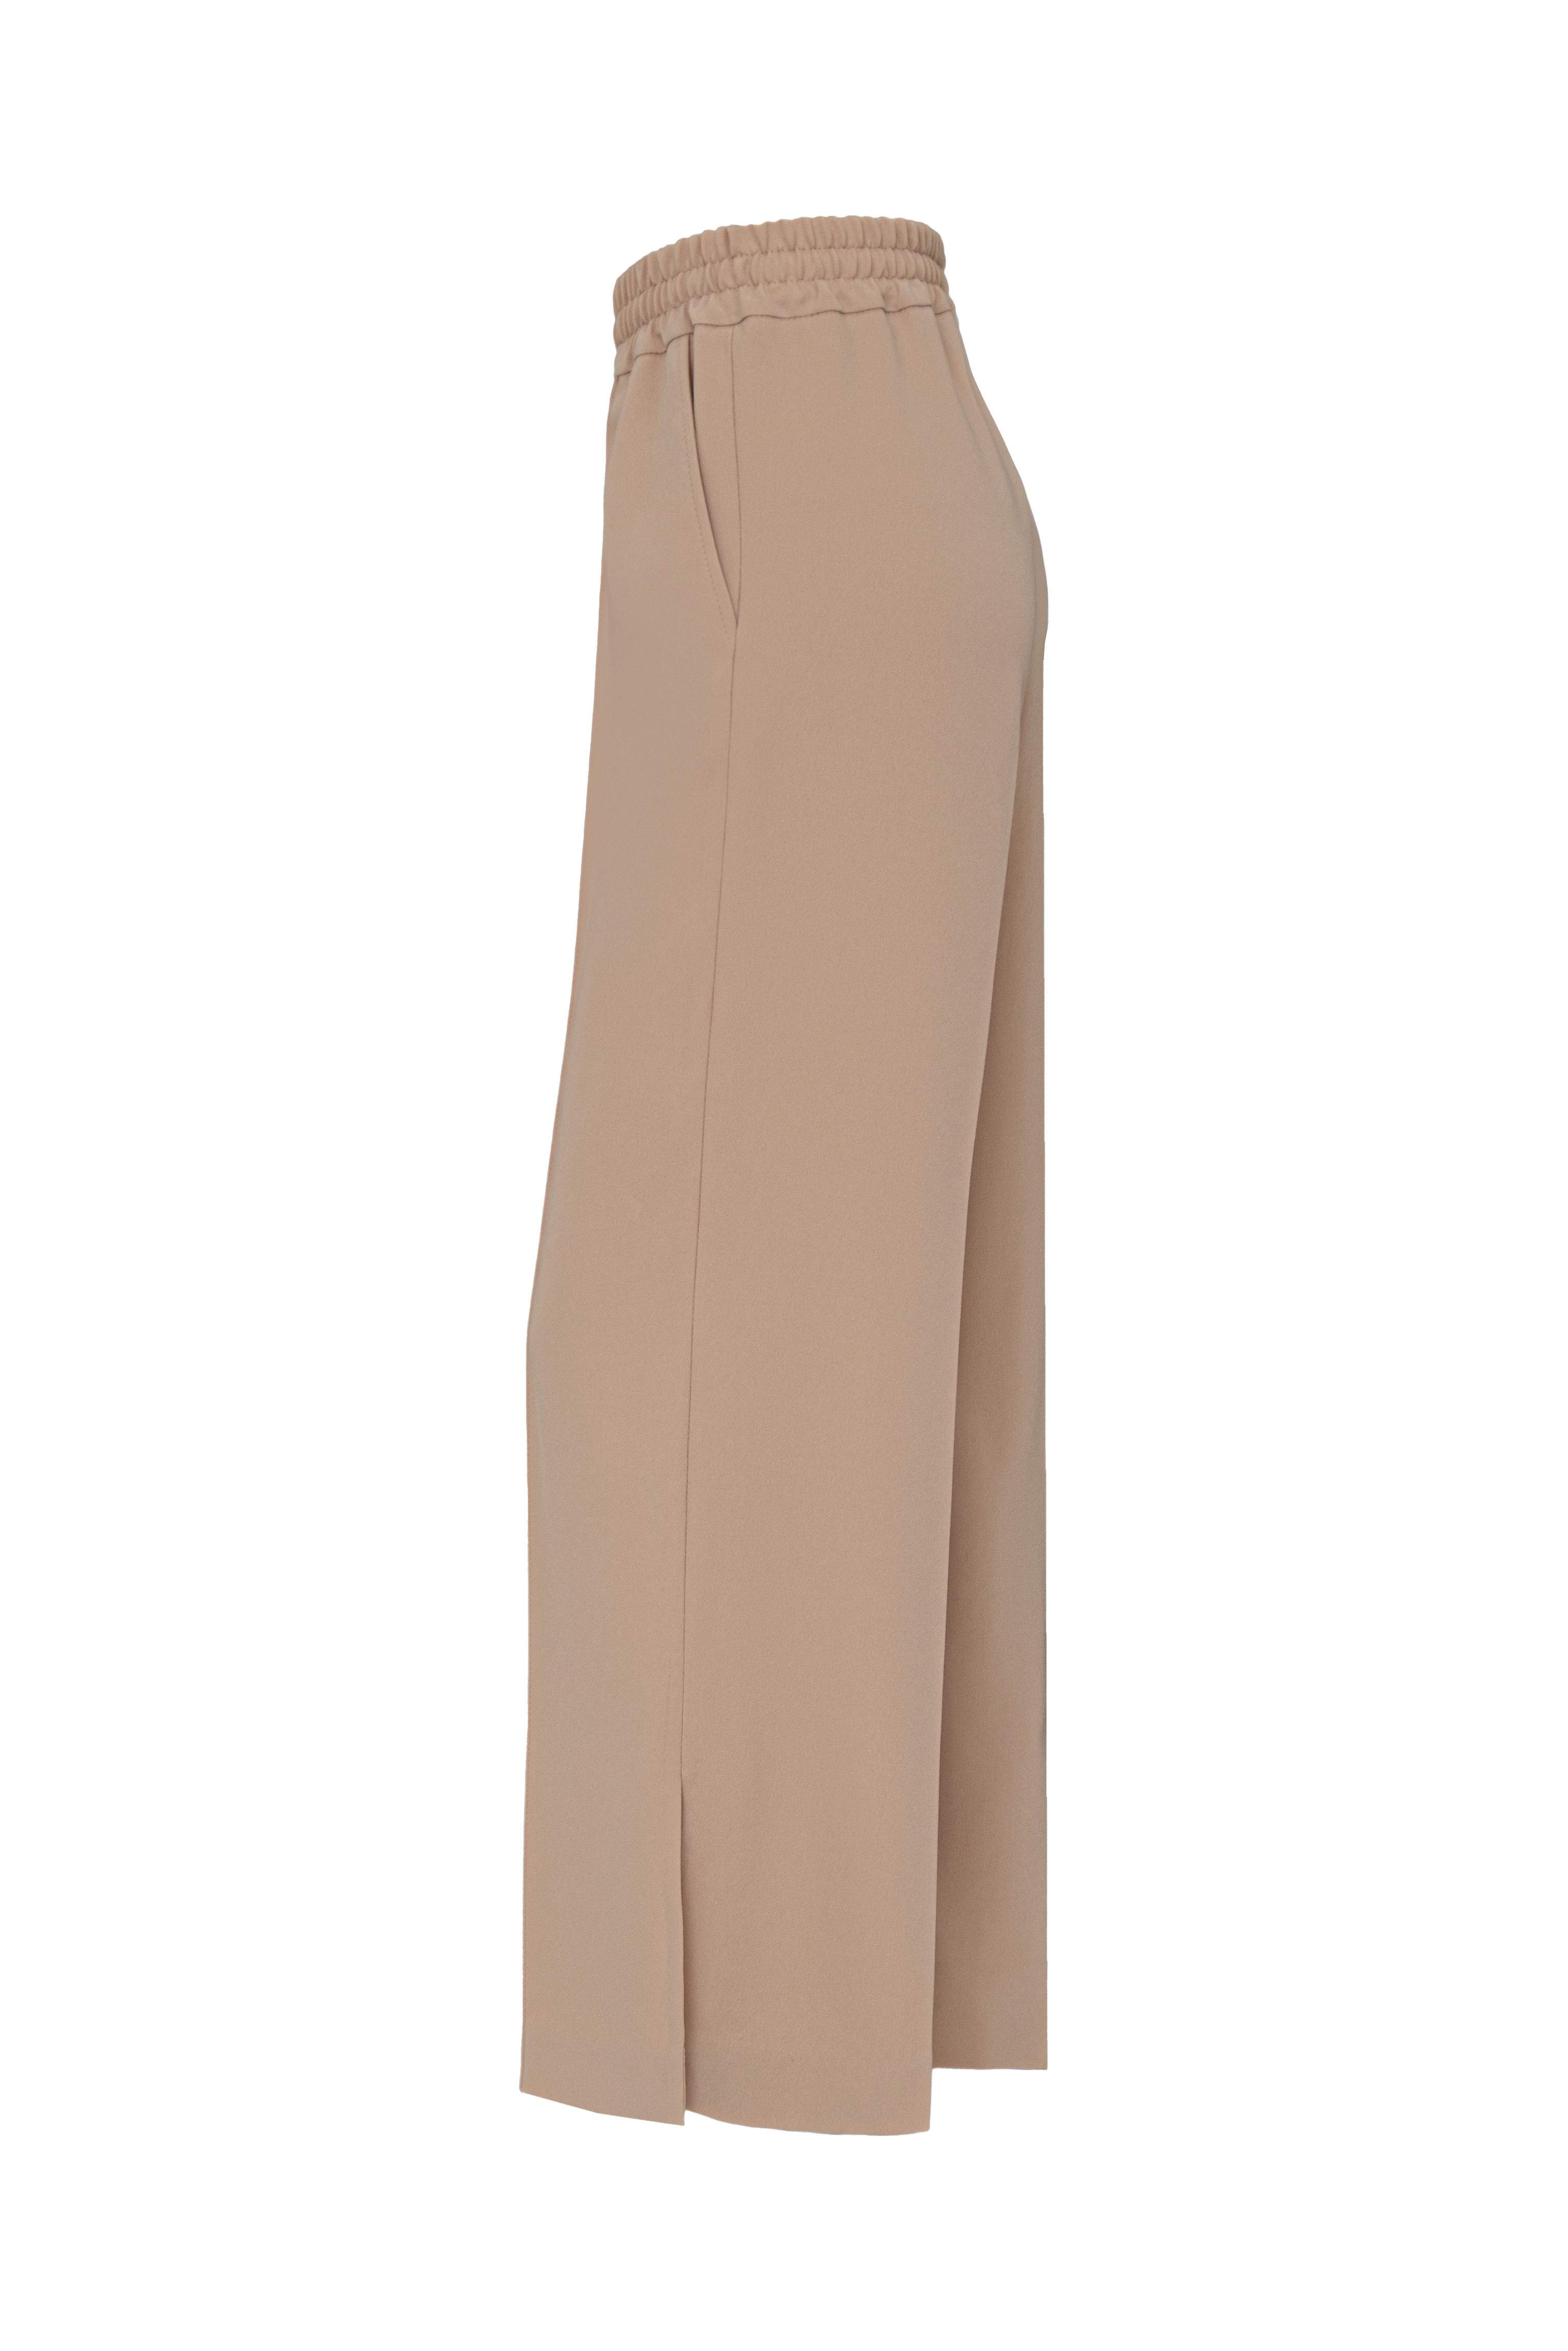 Trousers 4418-03 beige from BRUSNiKA